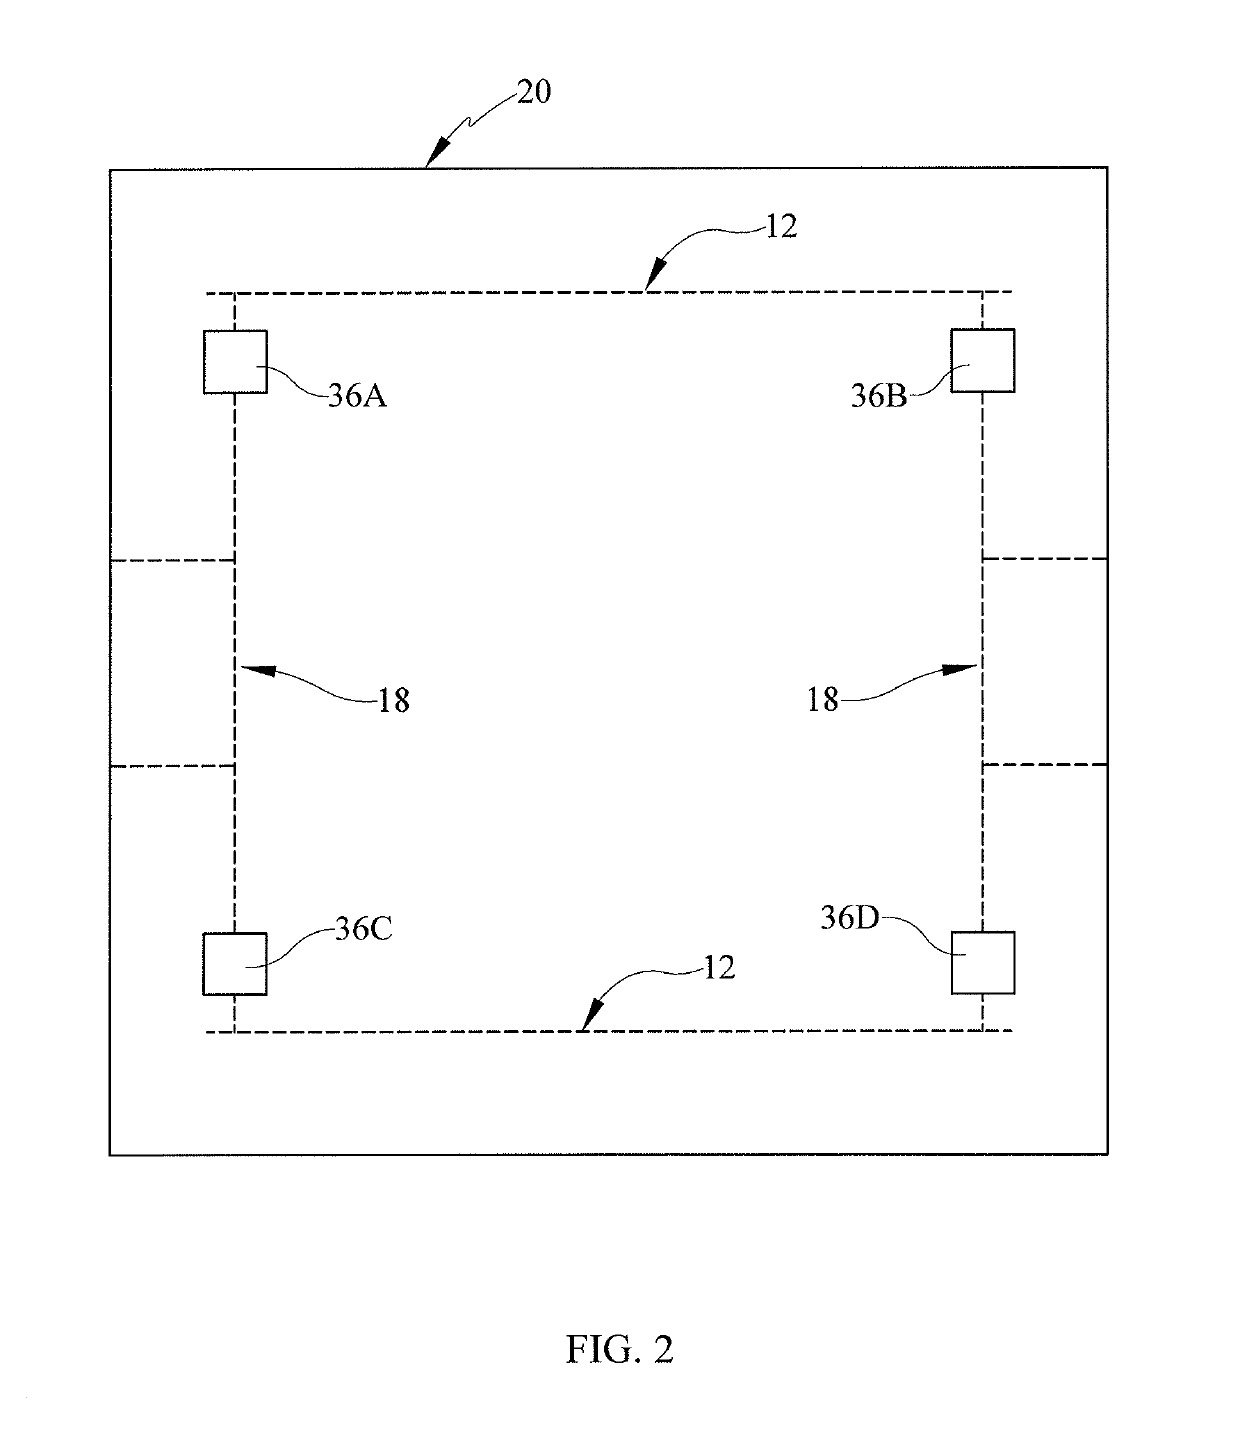 Bed load cell based physiological sensing systems and methods